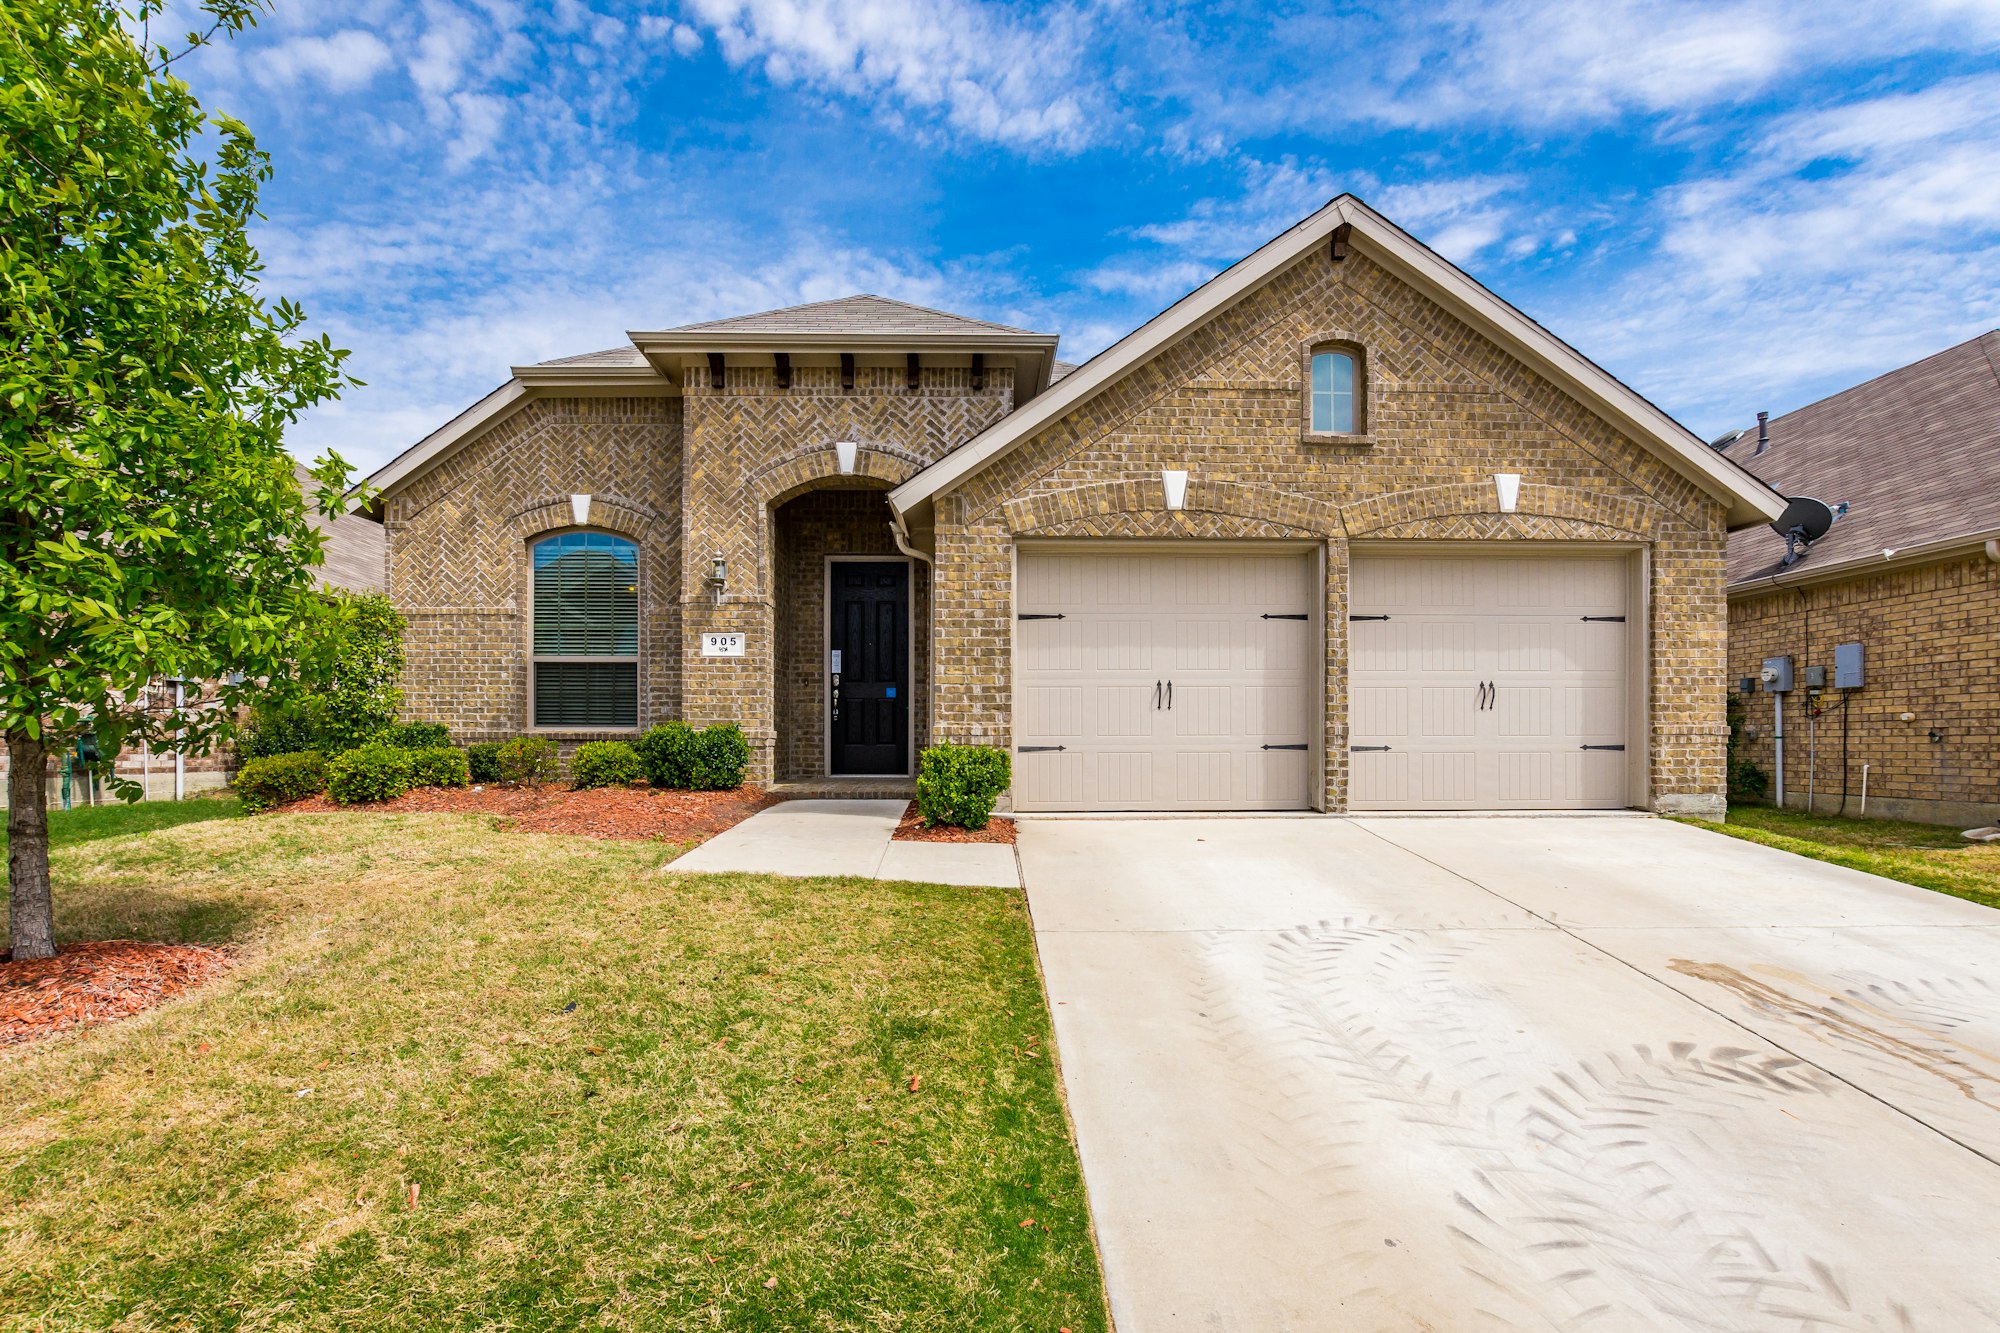 Photo 1 of 29 - 905 Green Coral Dr, Little Elm, TX 75068